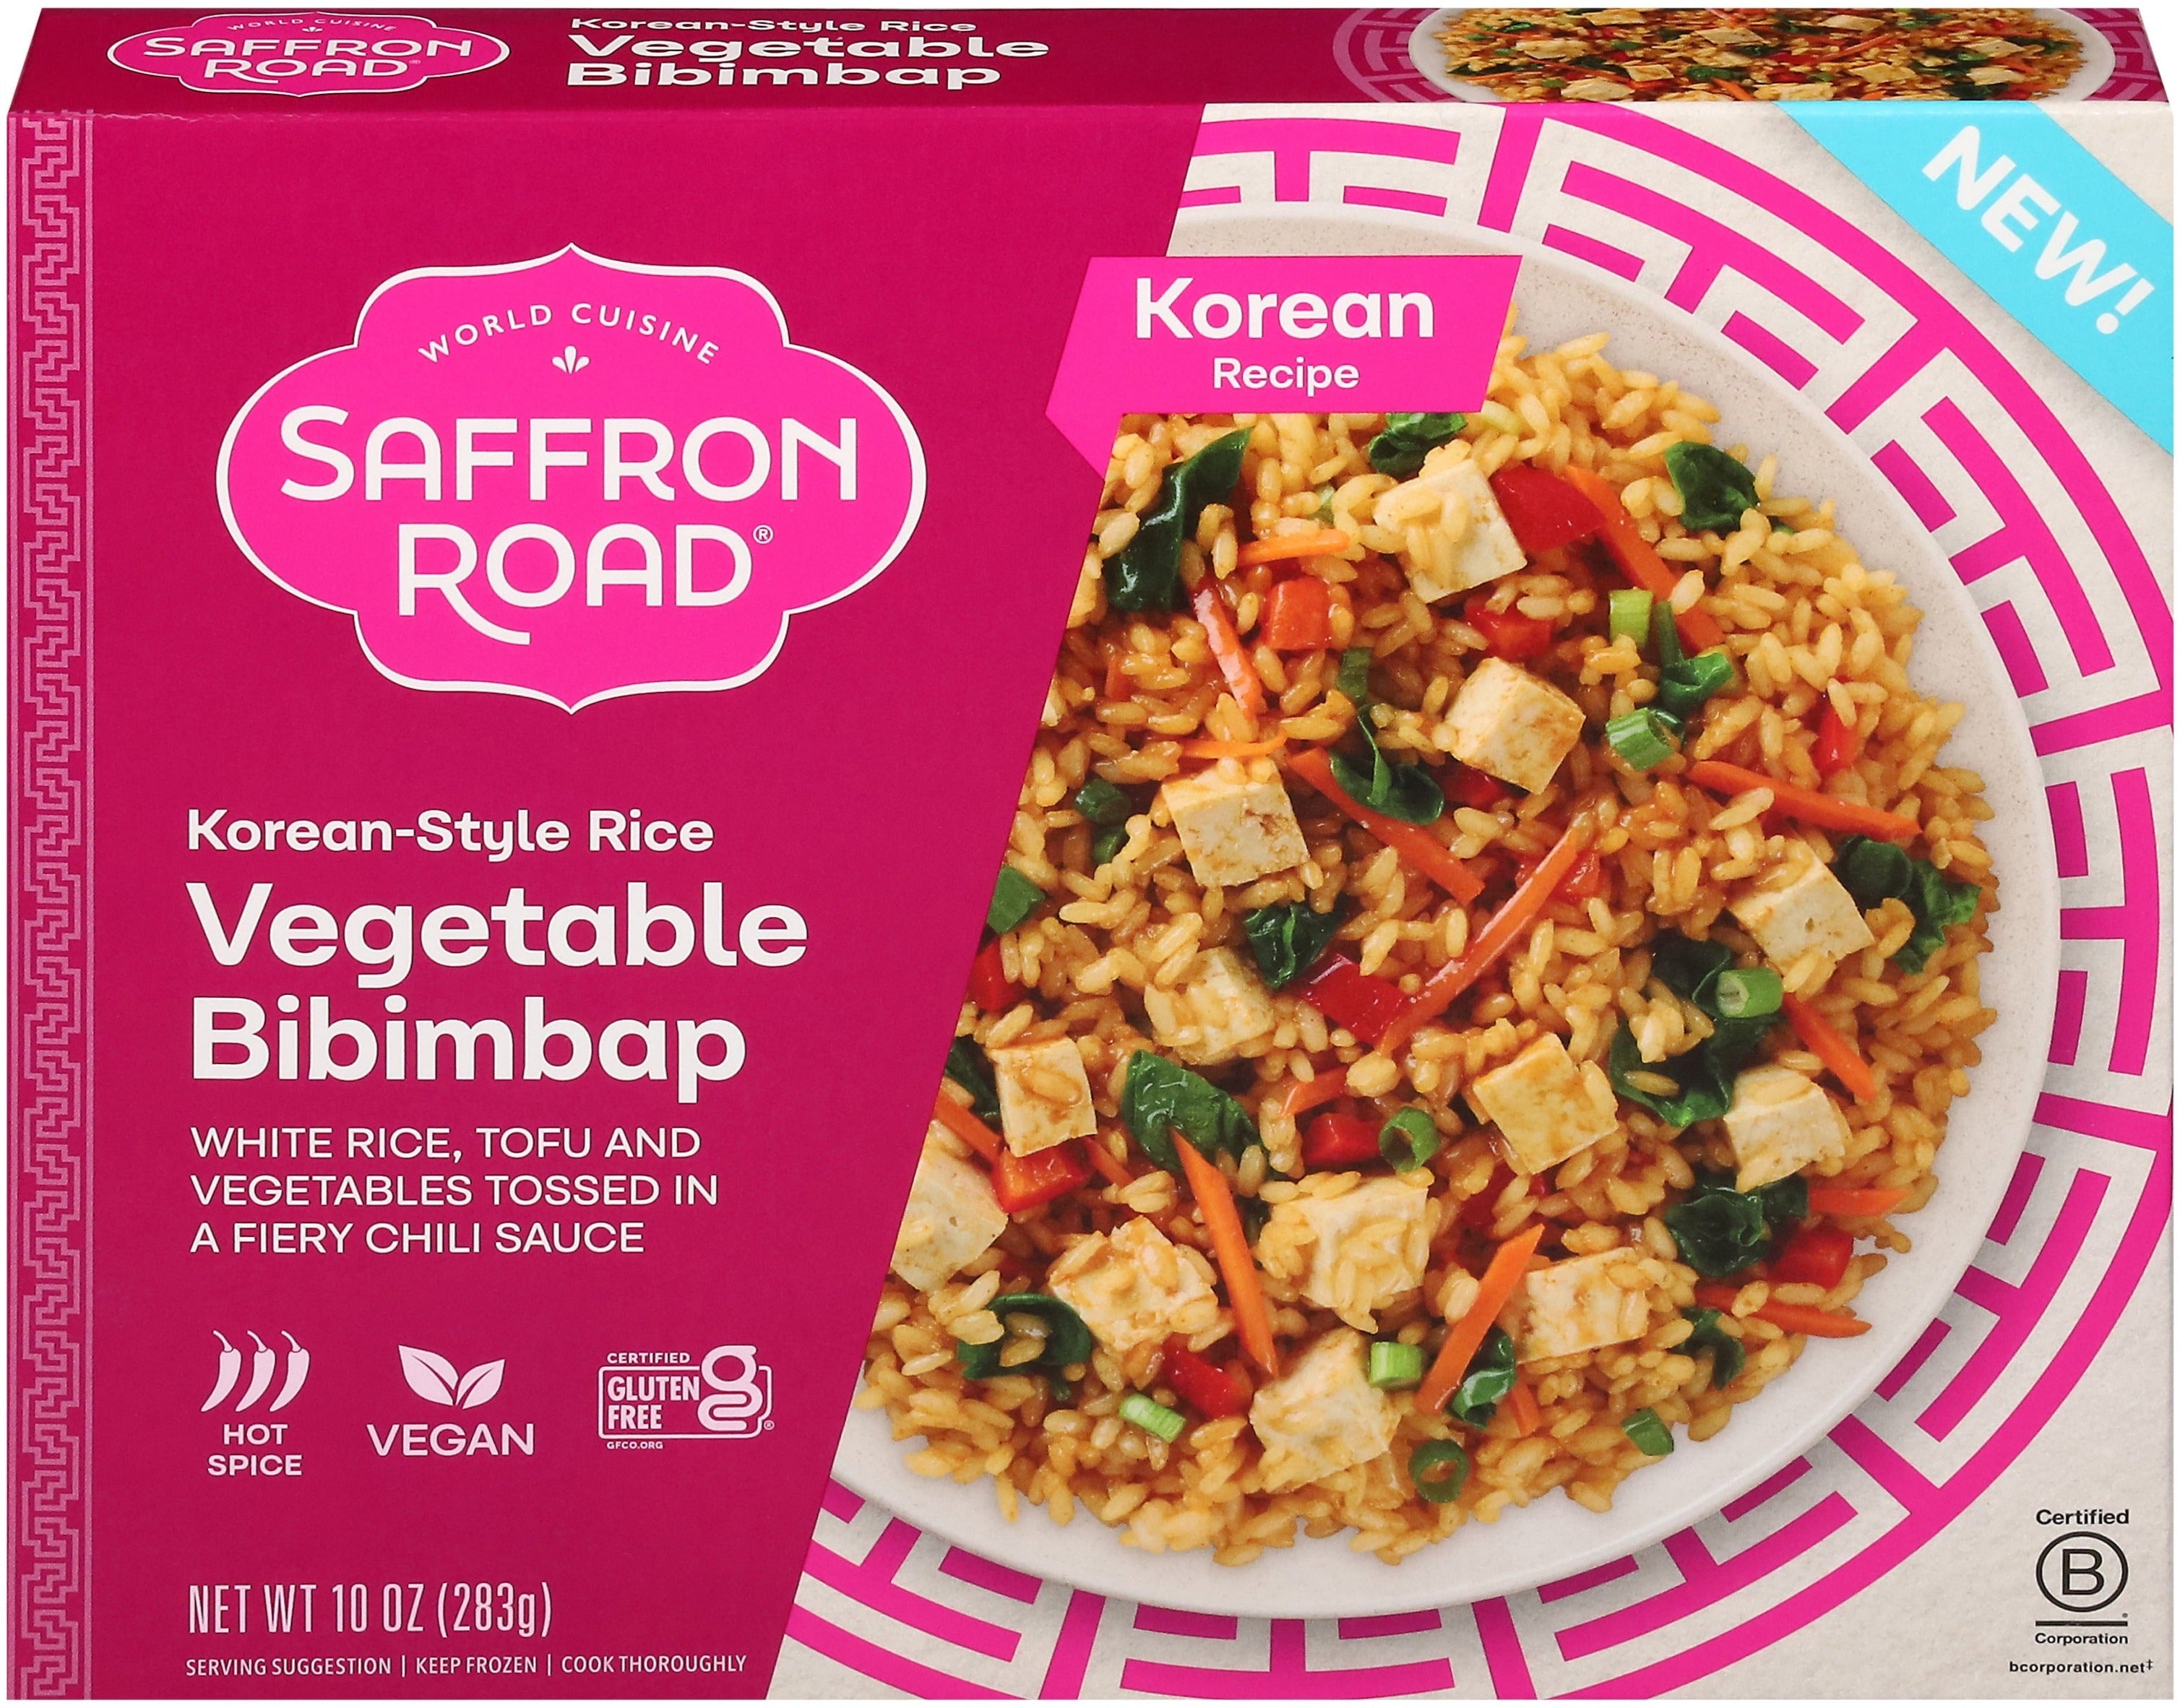 Front of Saffron Road Korean-Style Rice Vegetable Bibimbap package. Korean recipe with white rice, tofu, and vegetables in a chili sauce. Hot spice, vegan, gluten-free.